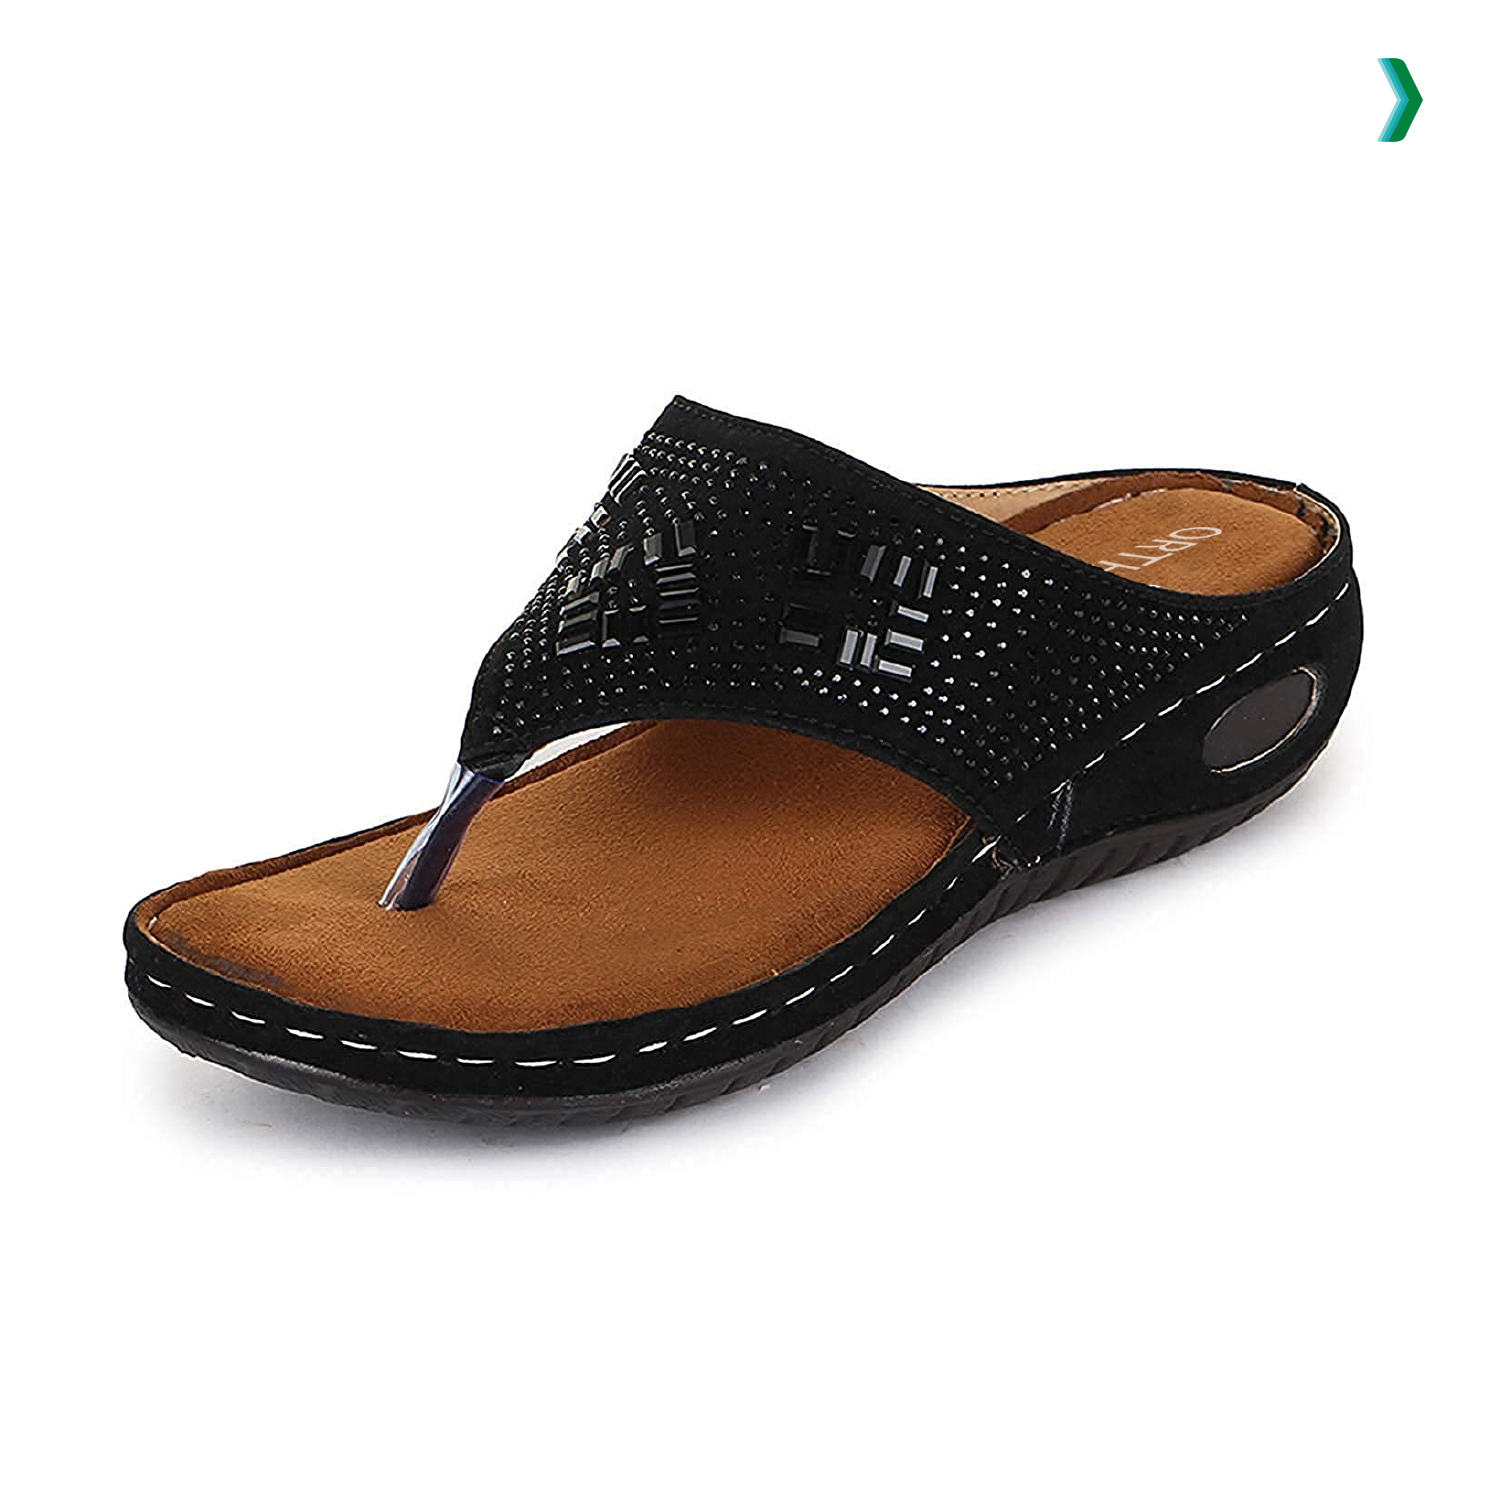 extra soft slippers, extra soft chappals for ladies